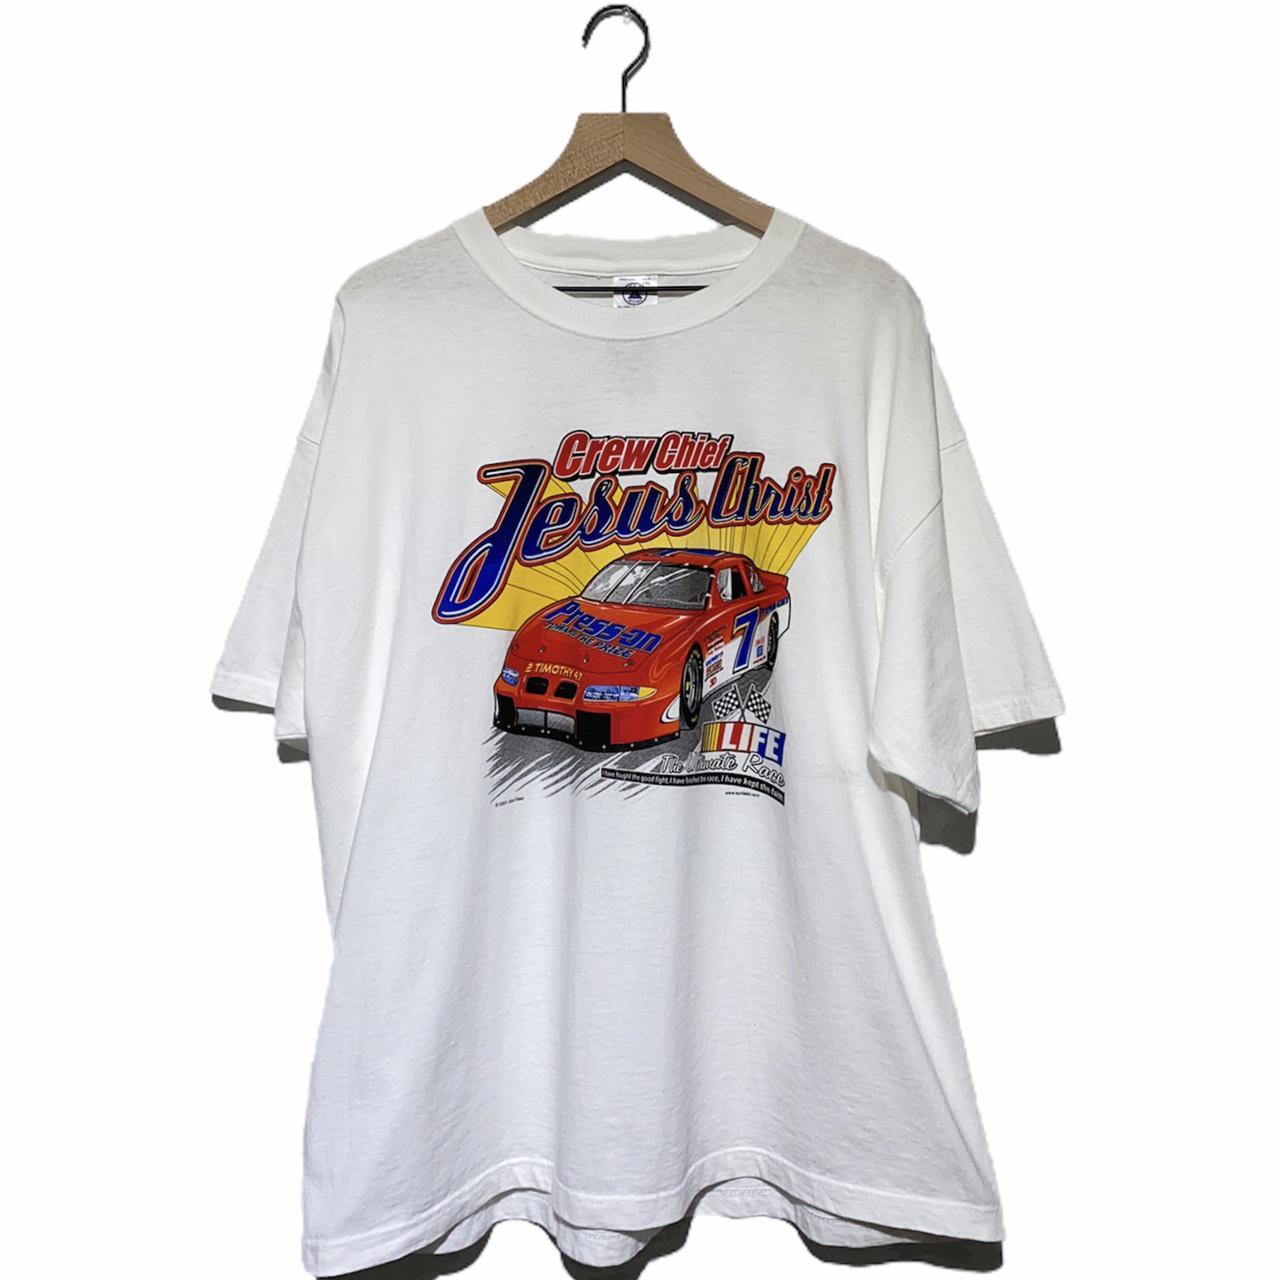 Product Image 1 - Vintage Early 2000s Crew Chief